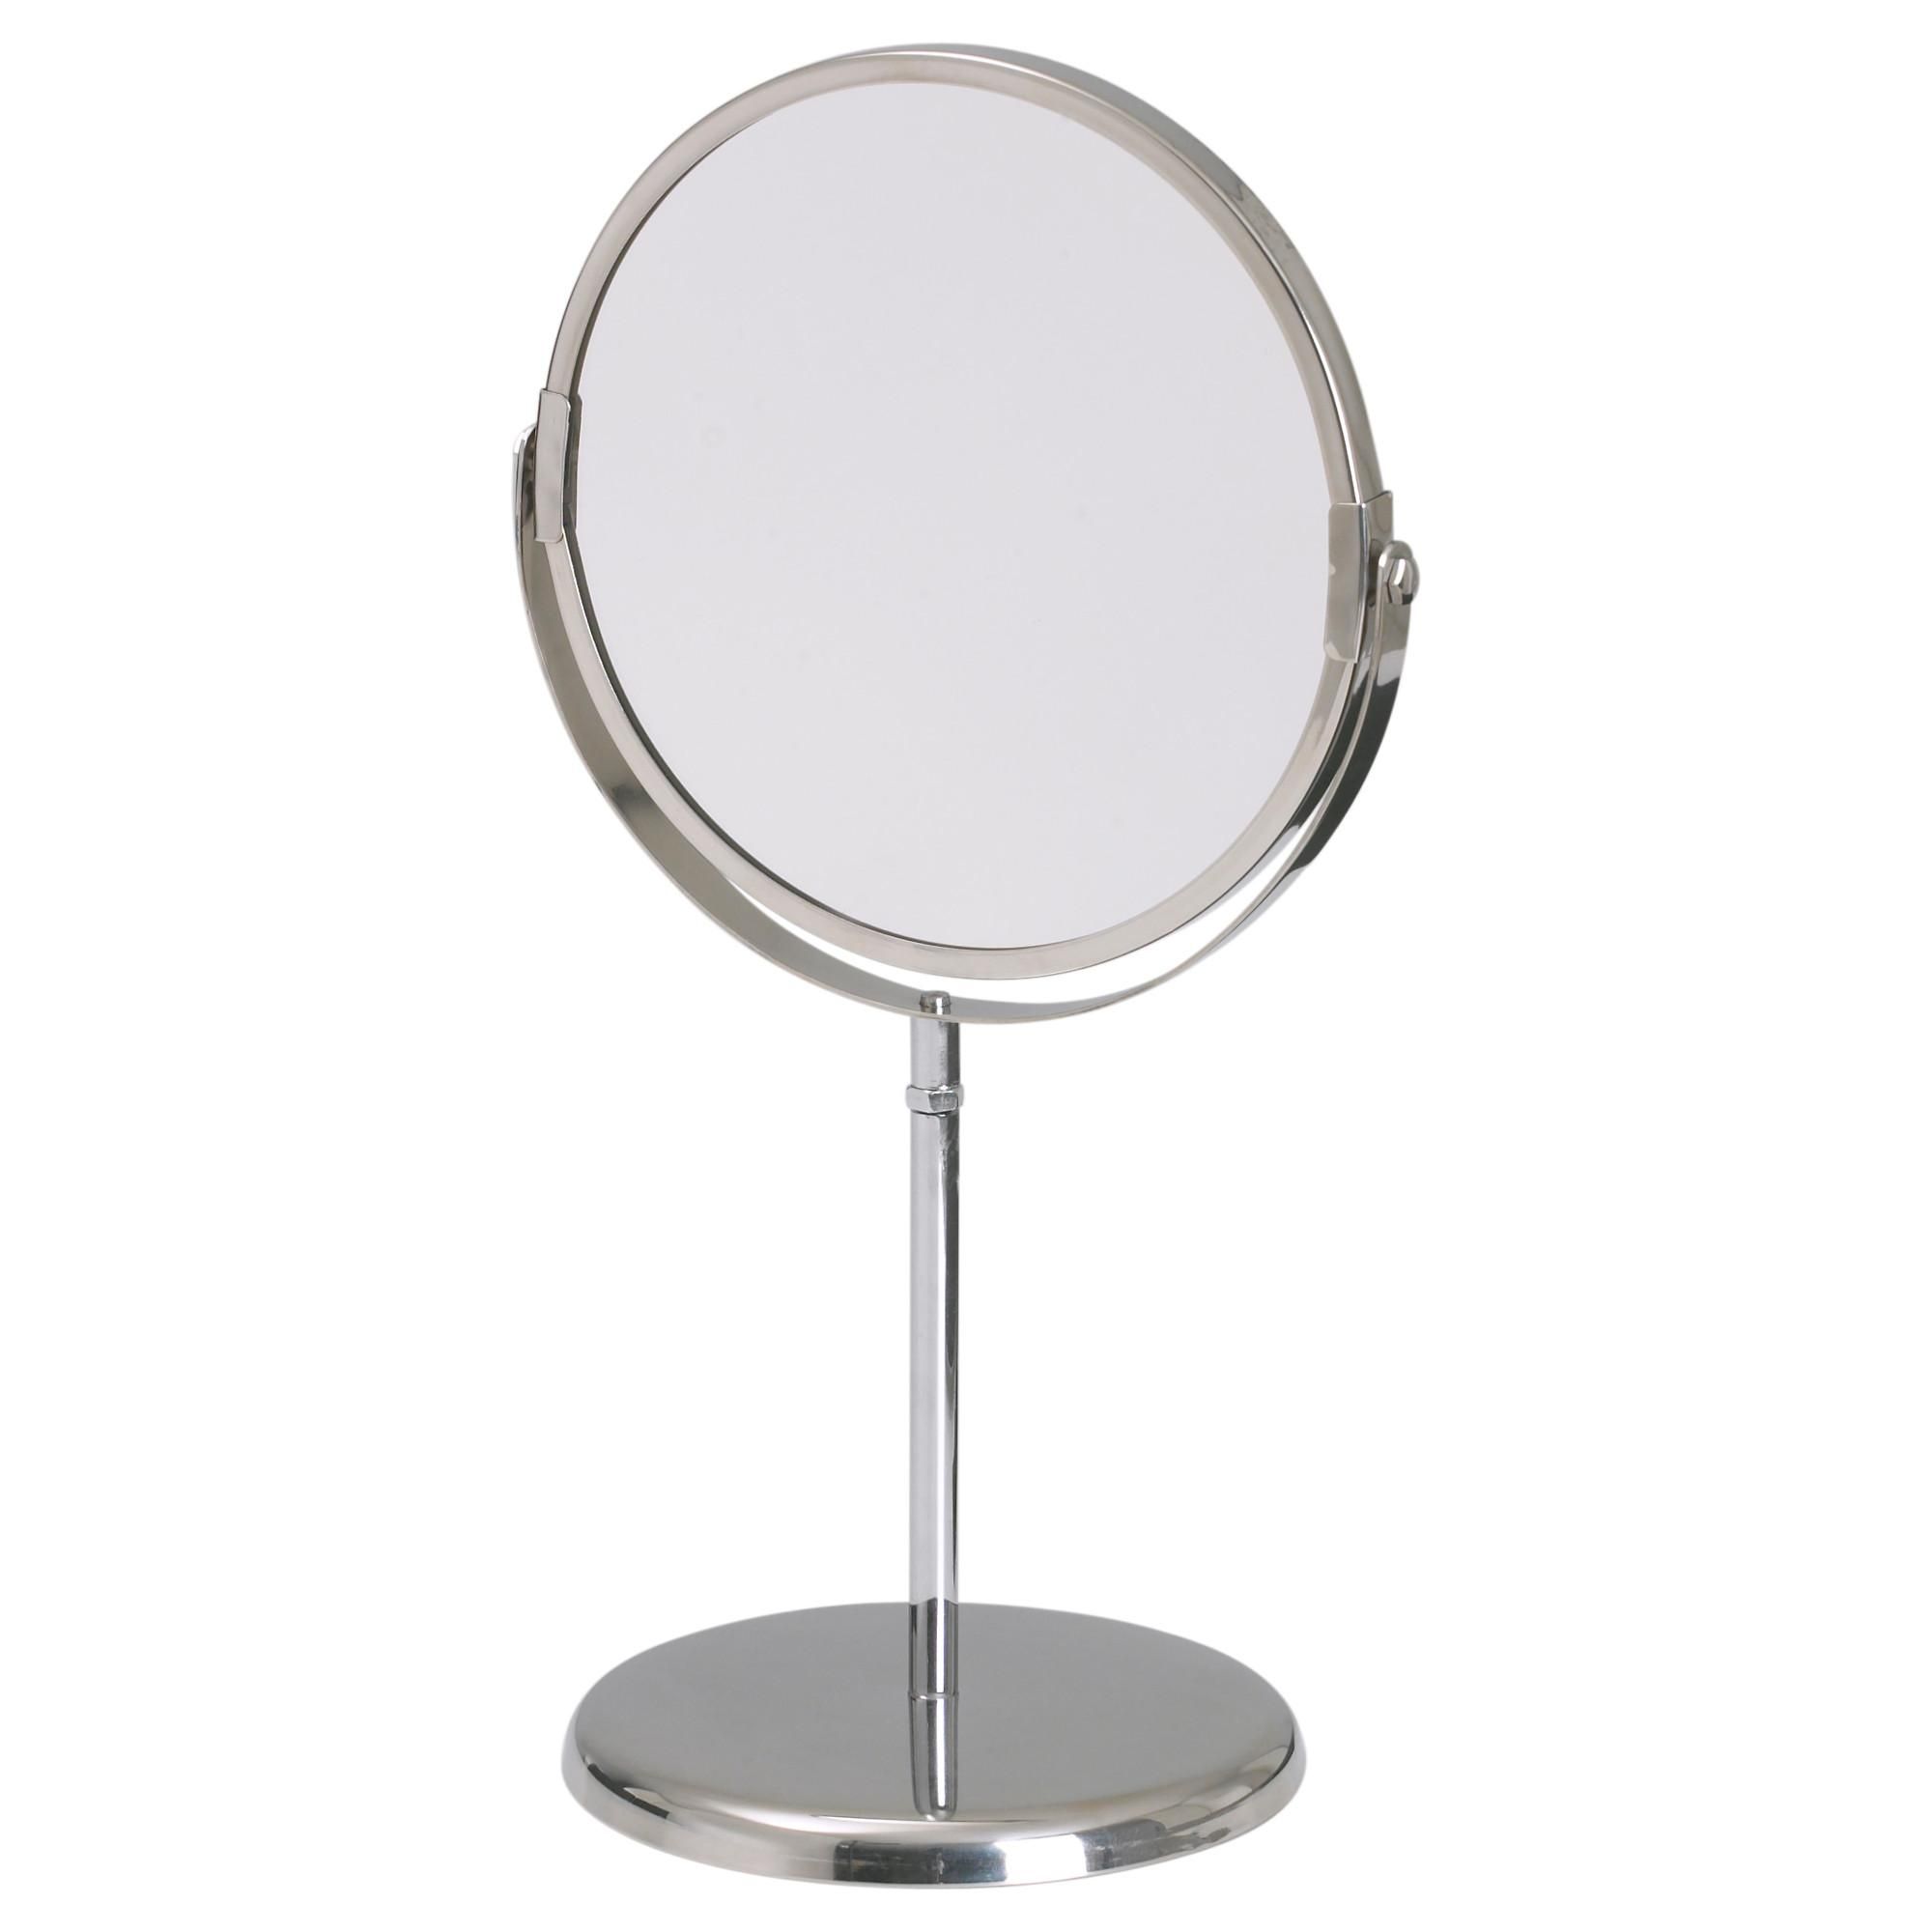 Trensum Mirror Ikea For Standing Table Mirror 